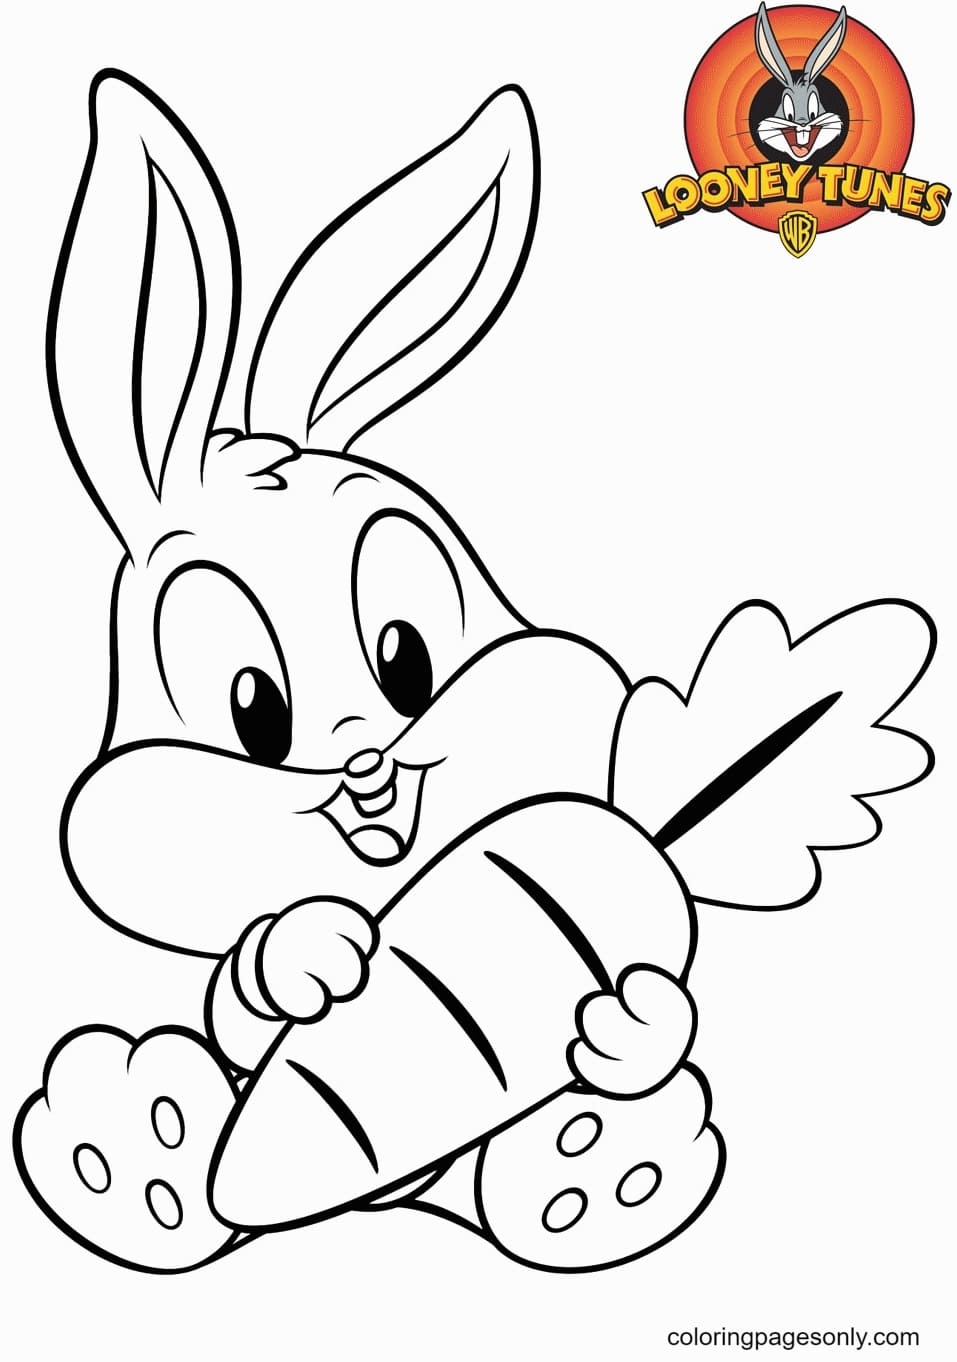 Cute Cartoon Bunnies Coloring Pages